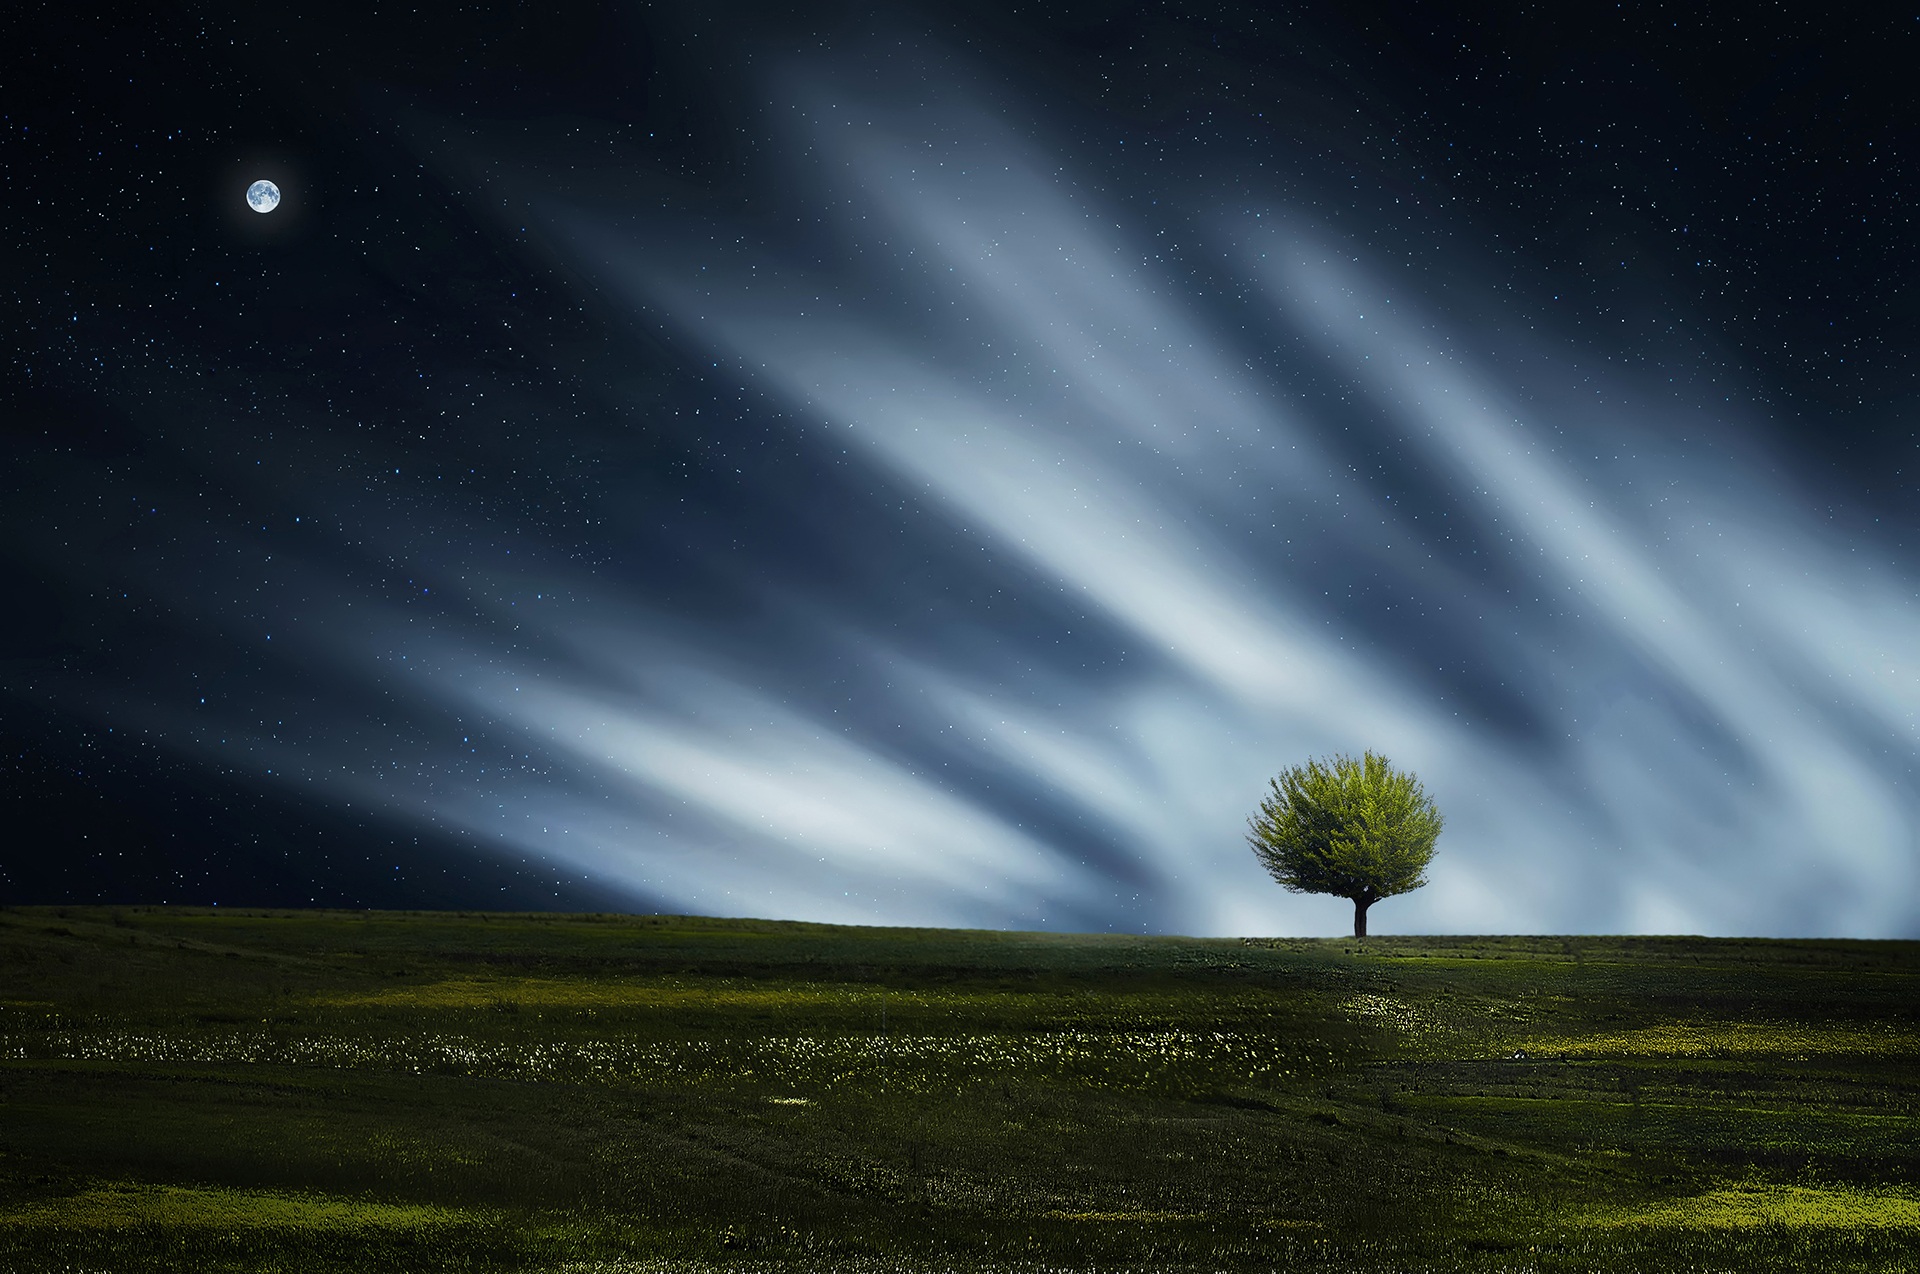 Tree in grassy valley under starry sky with moon and bright lights rising from Earth